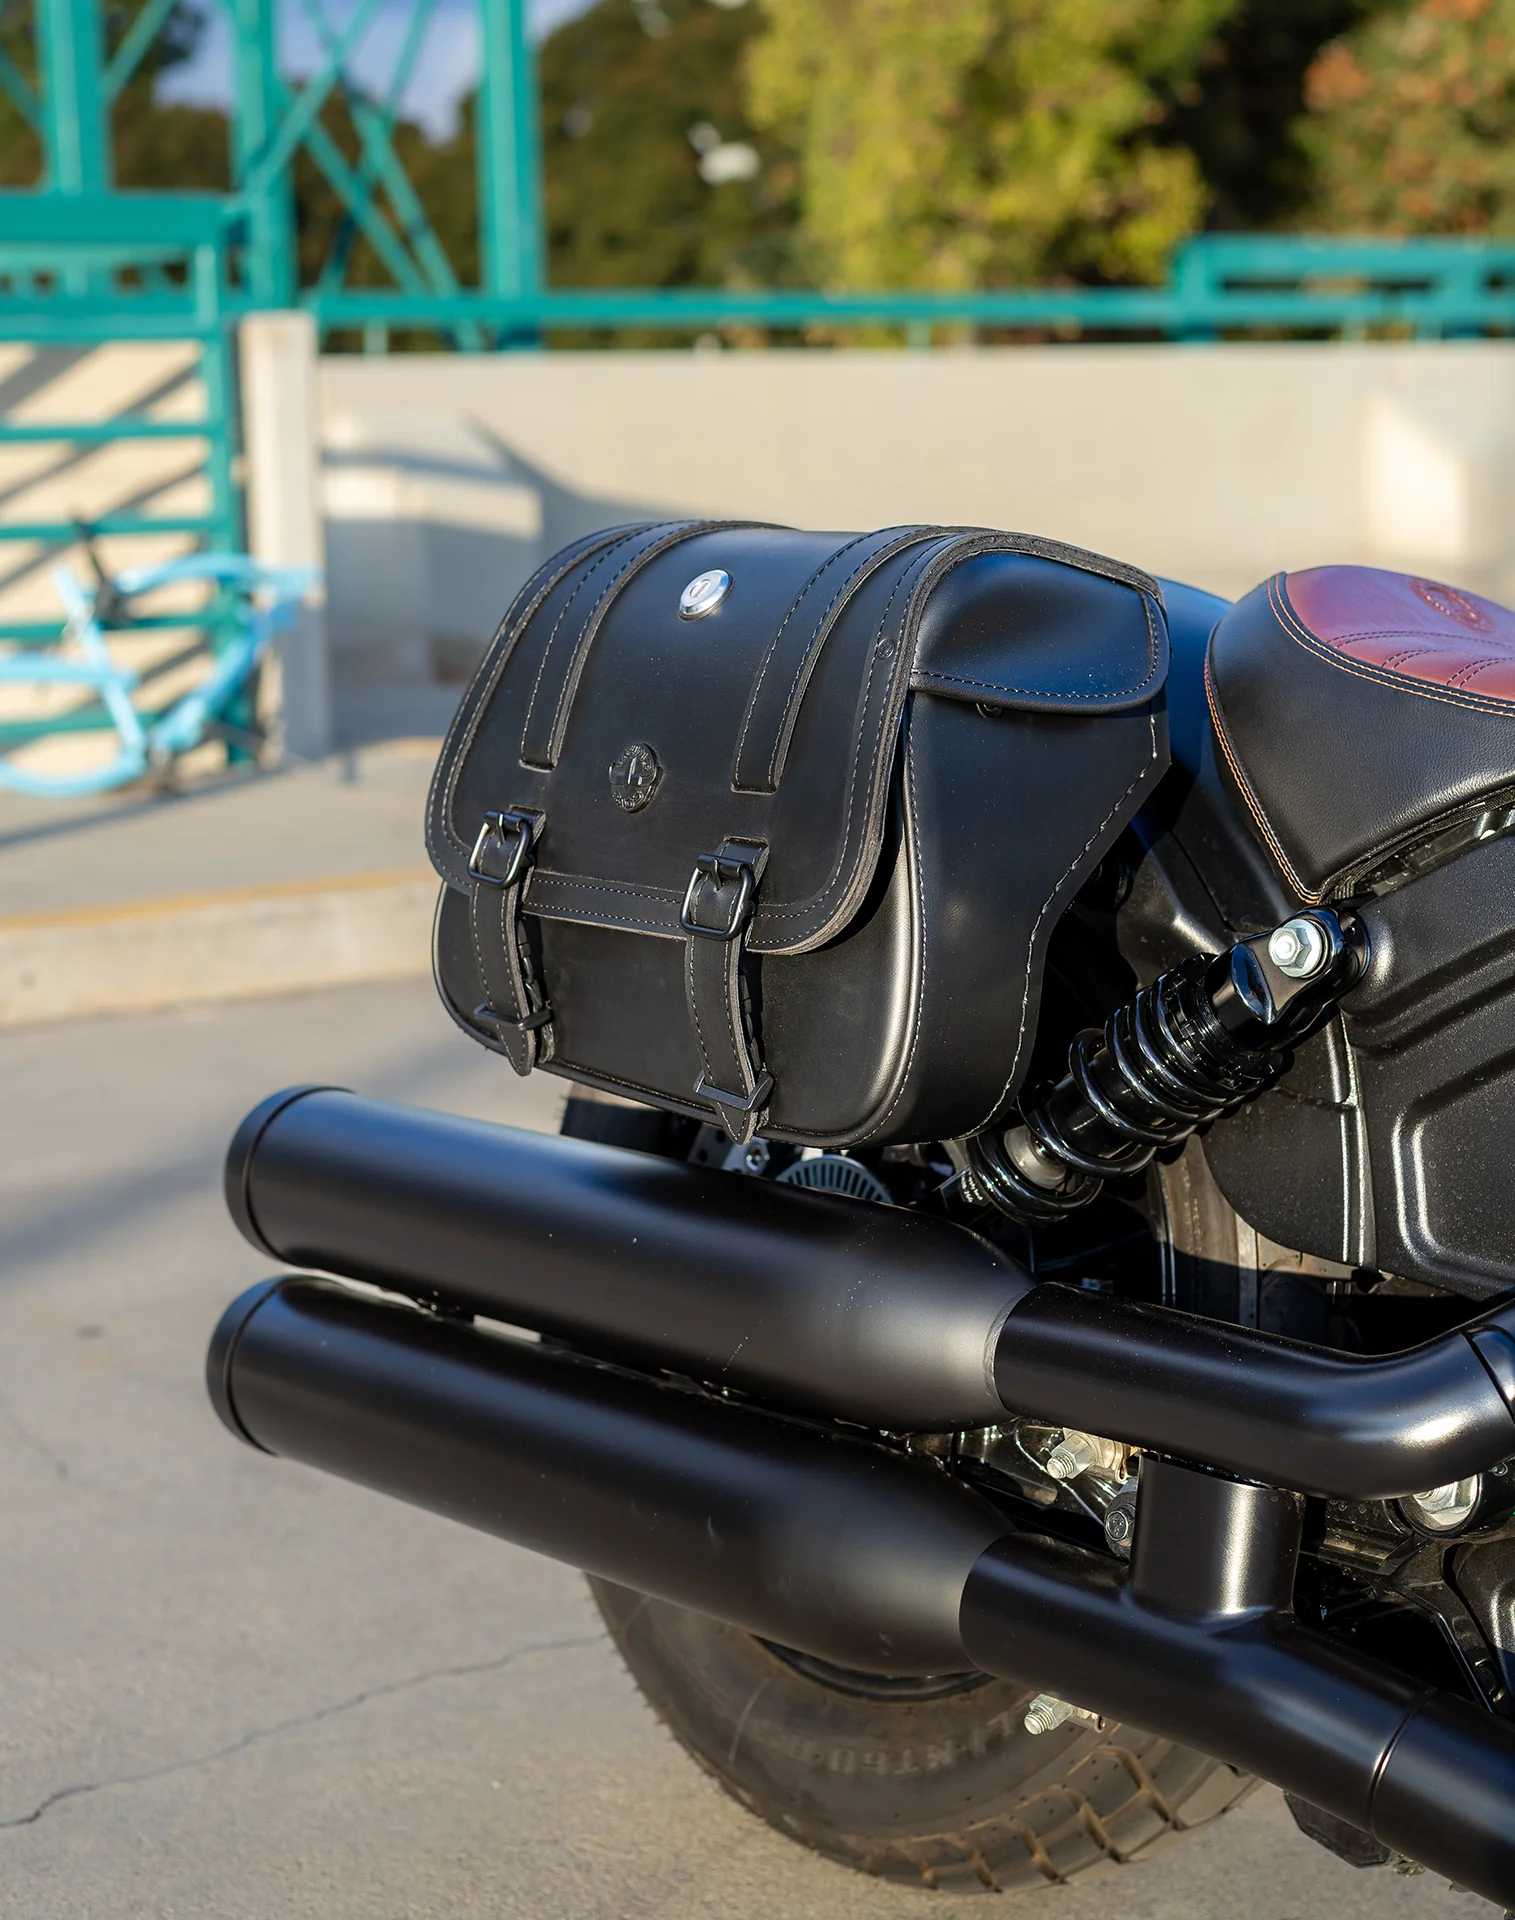 Viking Spiritblade Large Indian Scout Bobber Sixty Leather Motorcycle Saddlebags are Durable